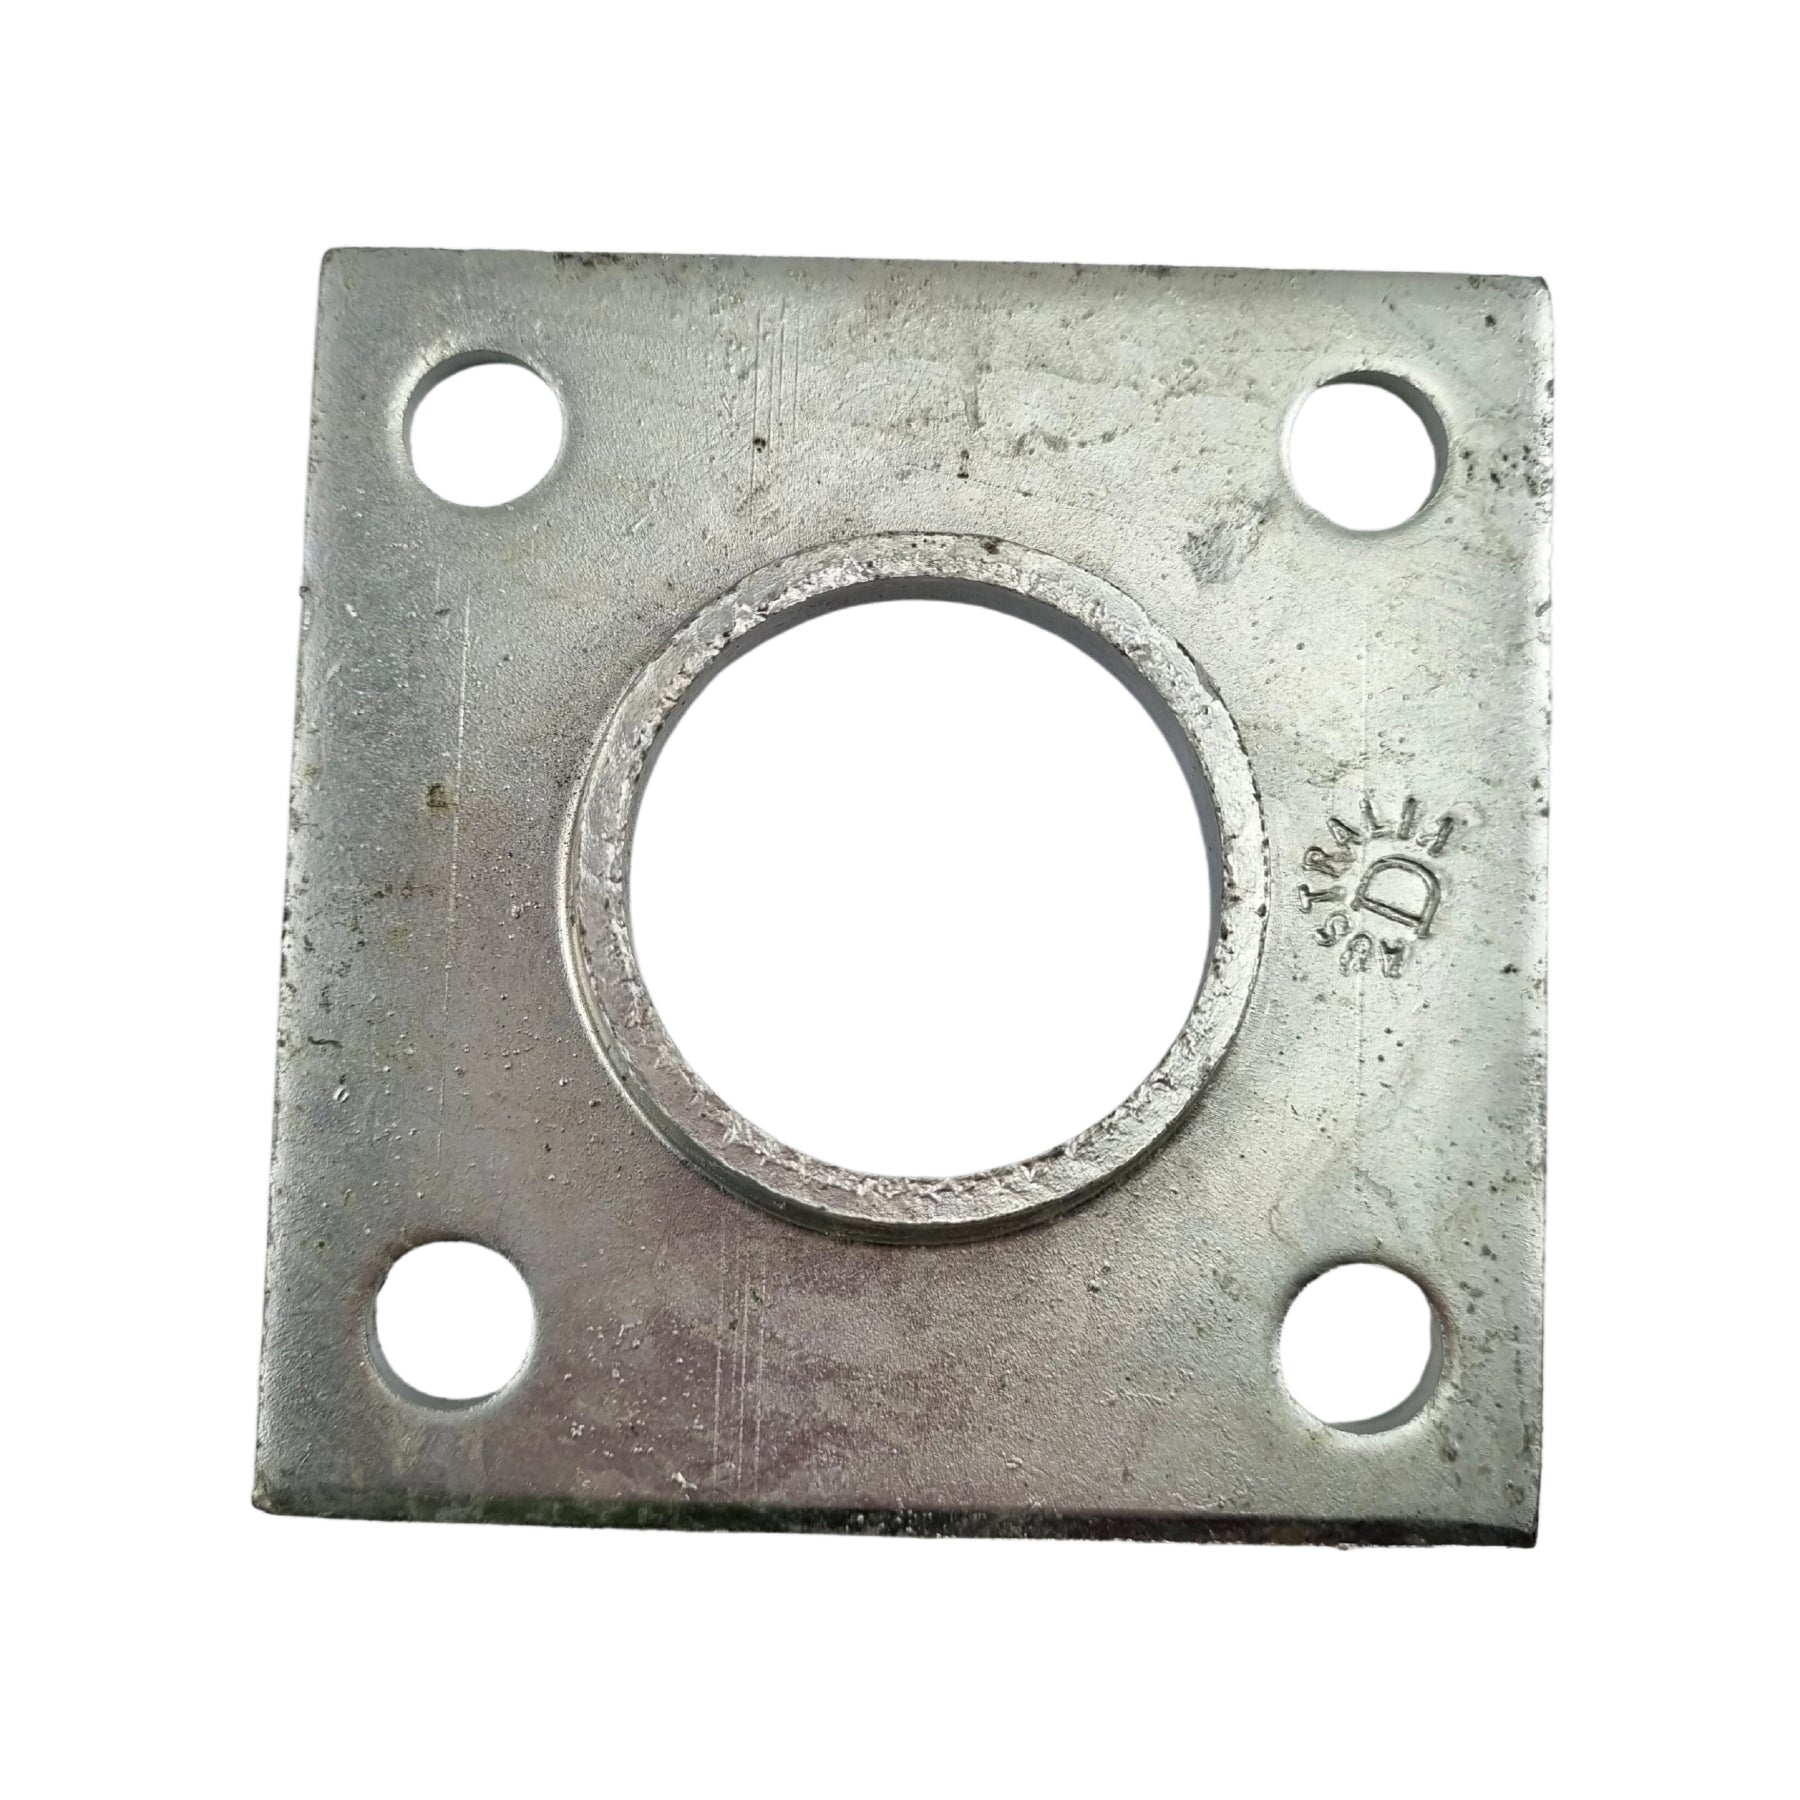  Square Flange Heavy Duty Galvanised. Australian made. Shop fence & gate fittings online chain.com.au. Australia wide shipping.